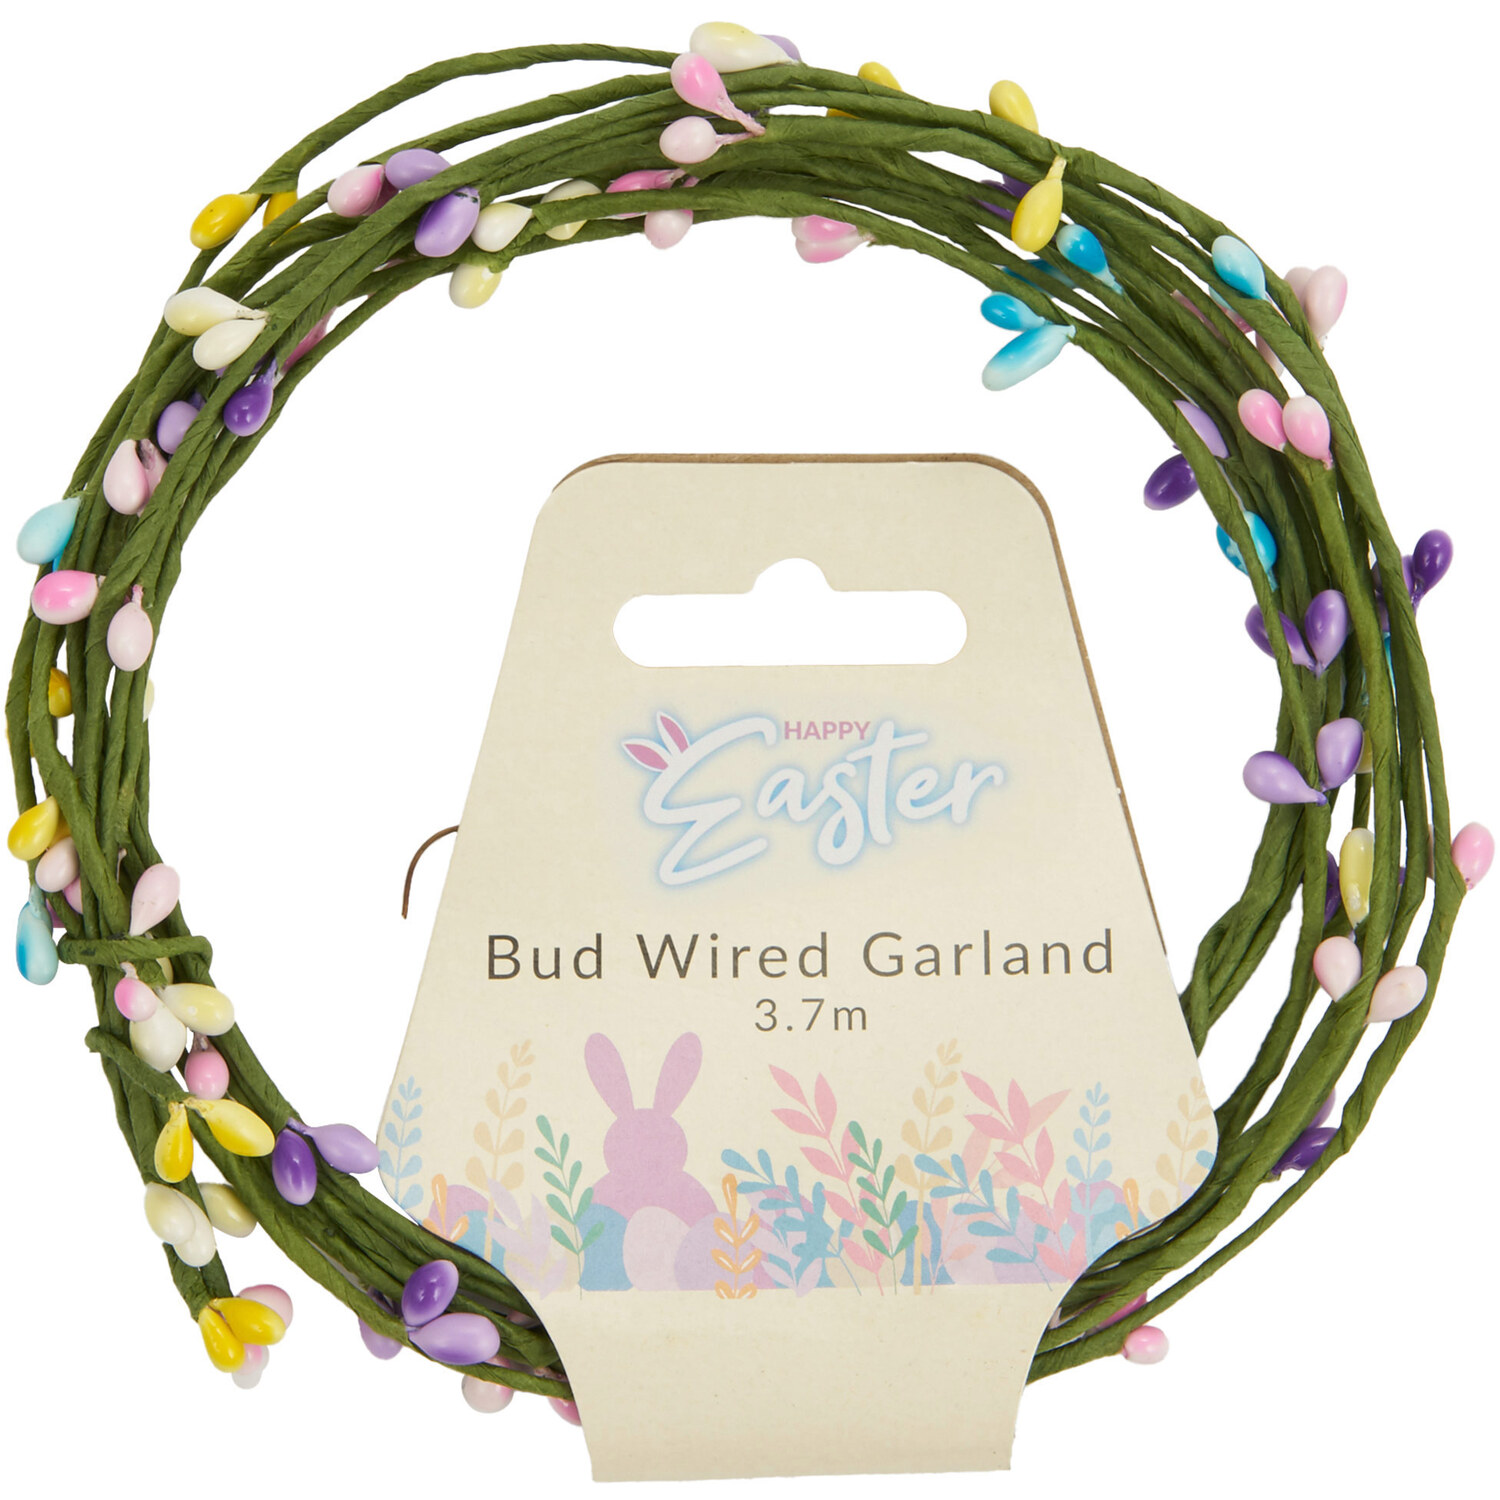 Easter Wired Garland with Buds Image 1